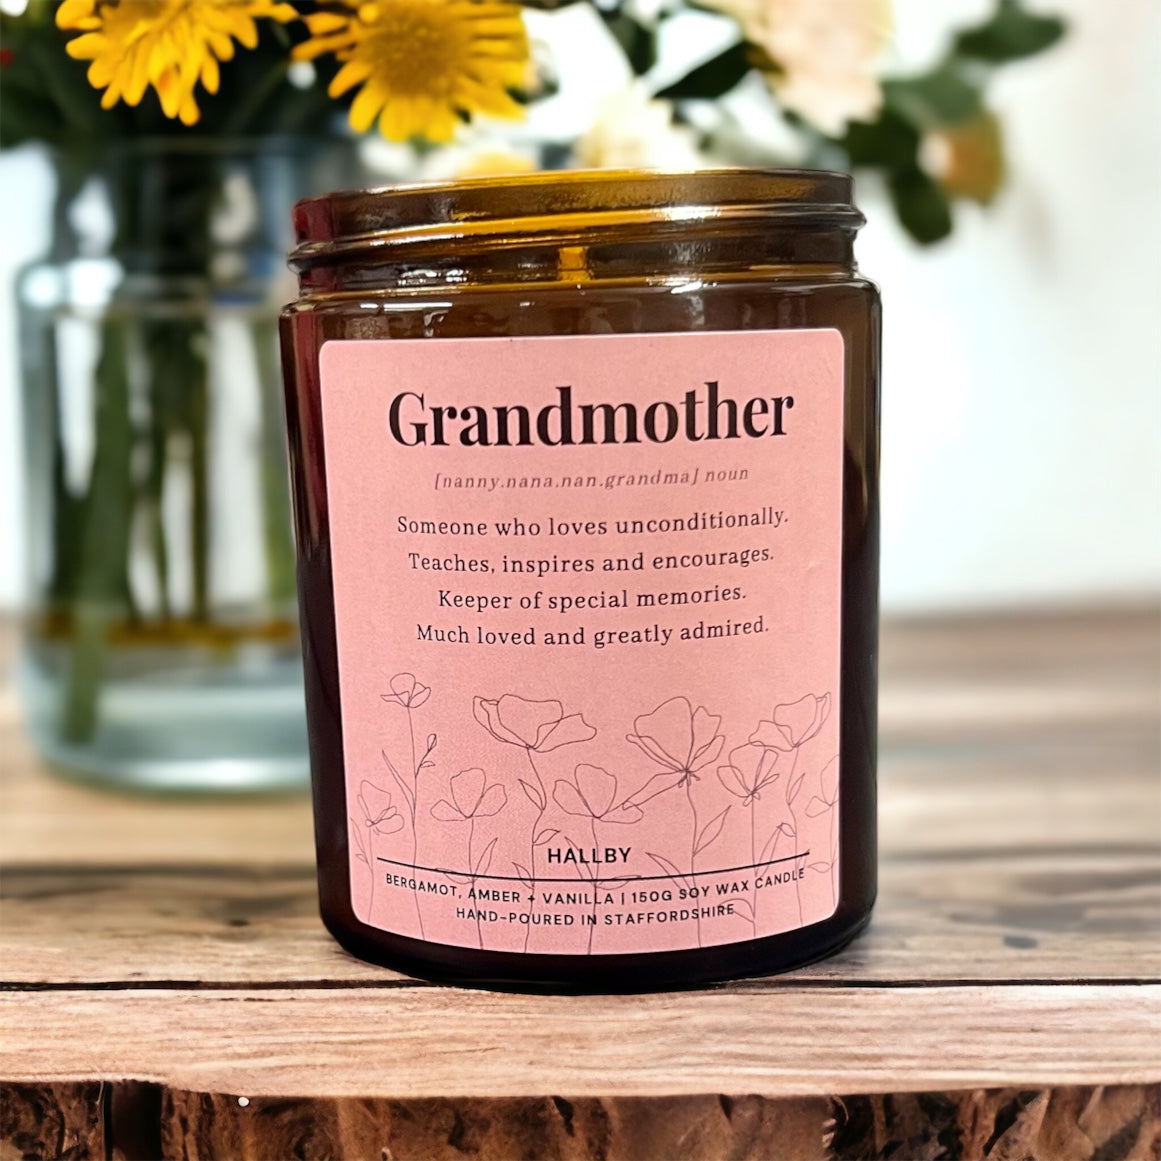 Candle and Coaster Gift for grandmother Grandmother gift grandmother treat grandmother gift box birthday gift candle grandmother candle